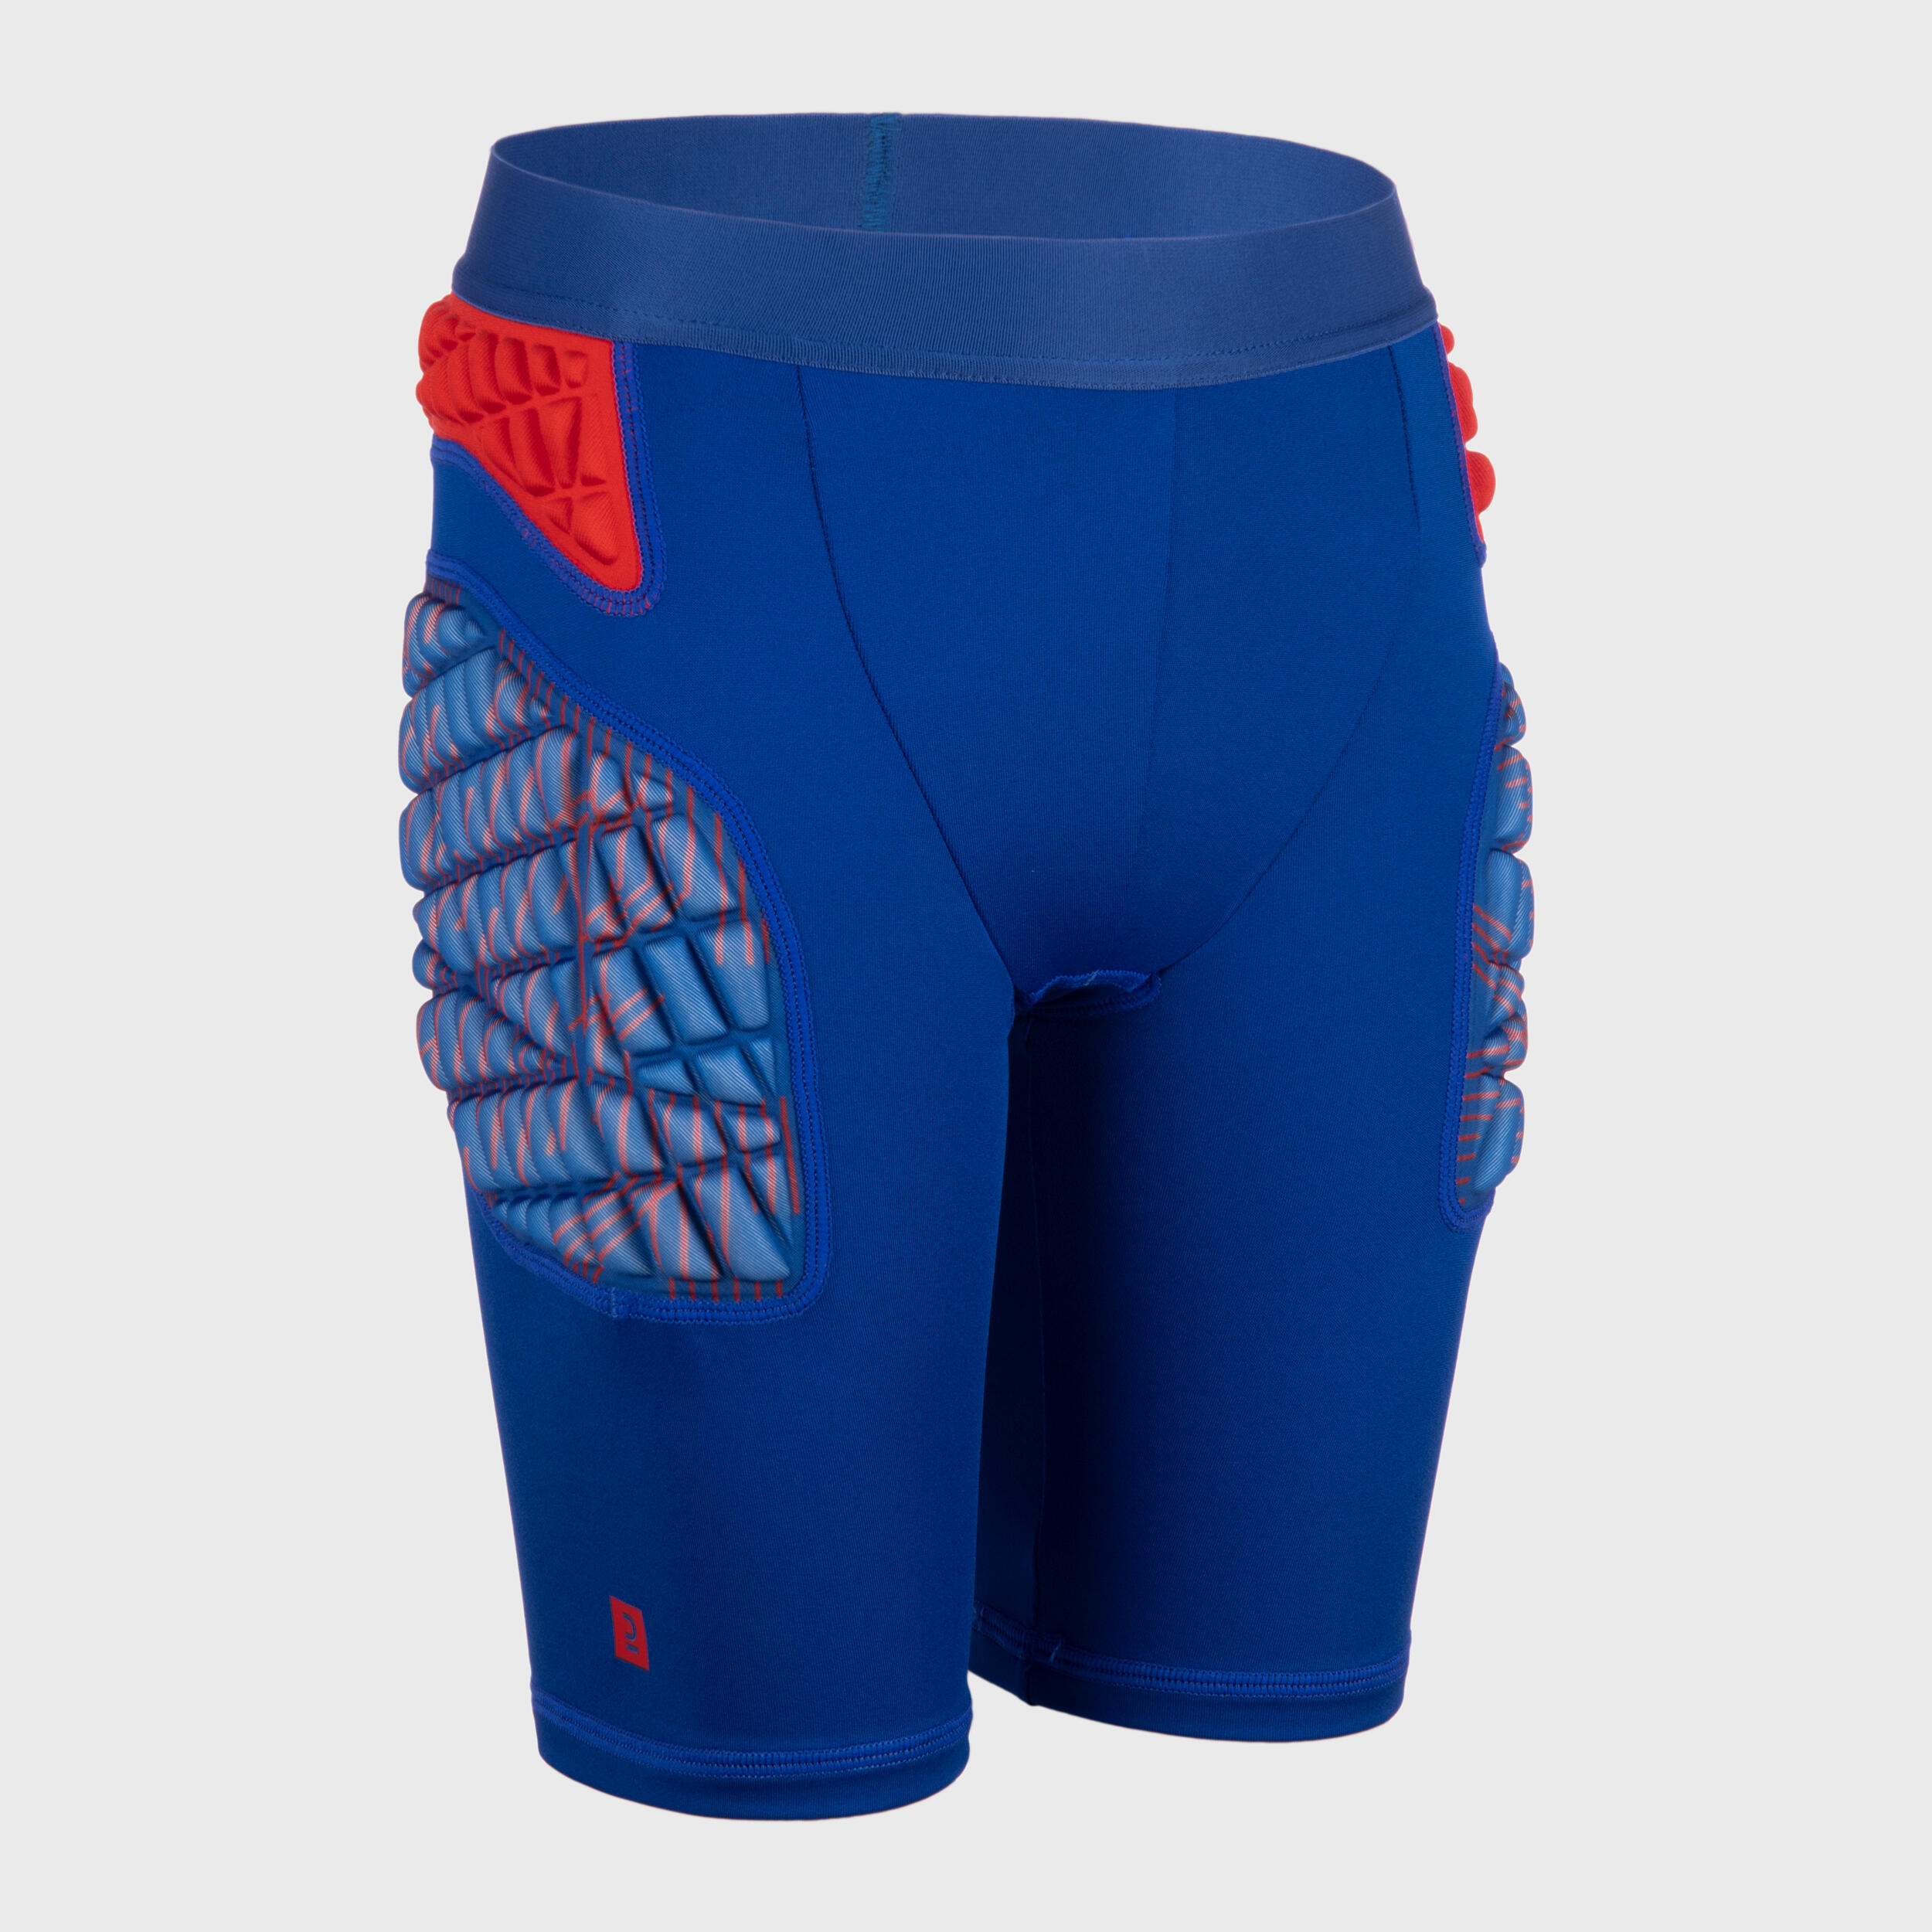 OFFLOAD Kids' Protective Rugby Undershorts R500 - Blue/Red